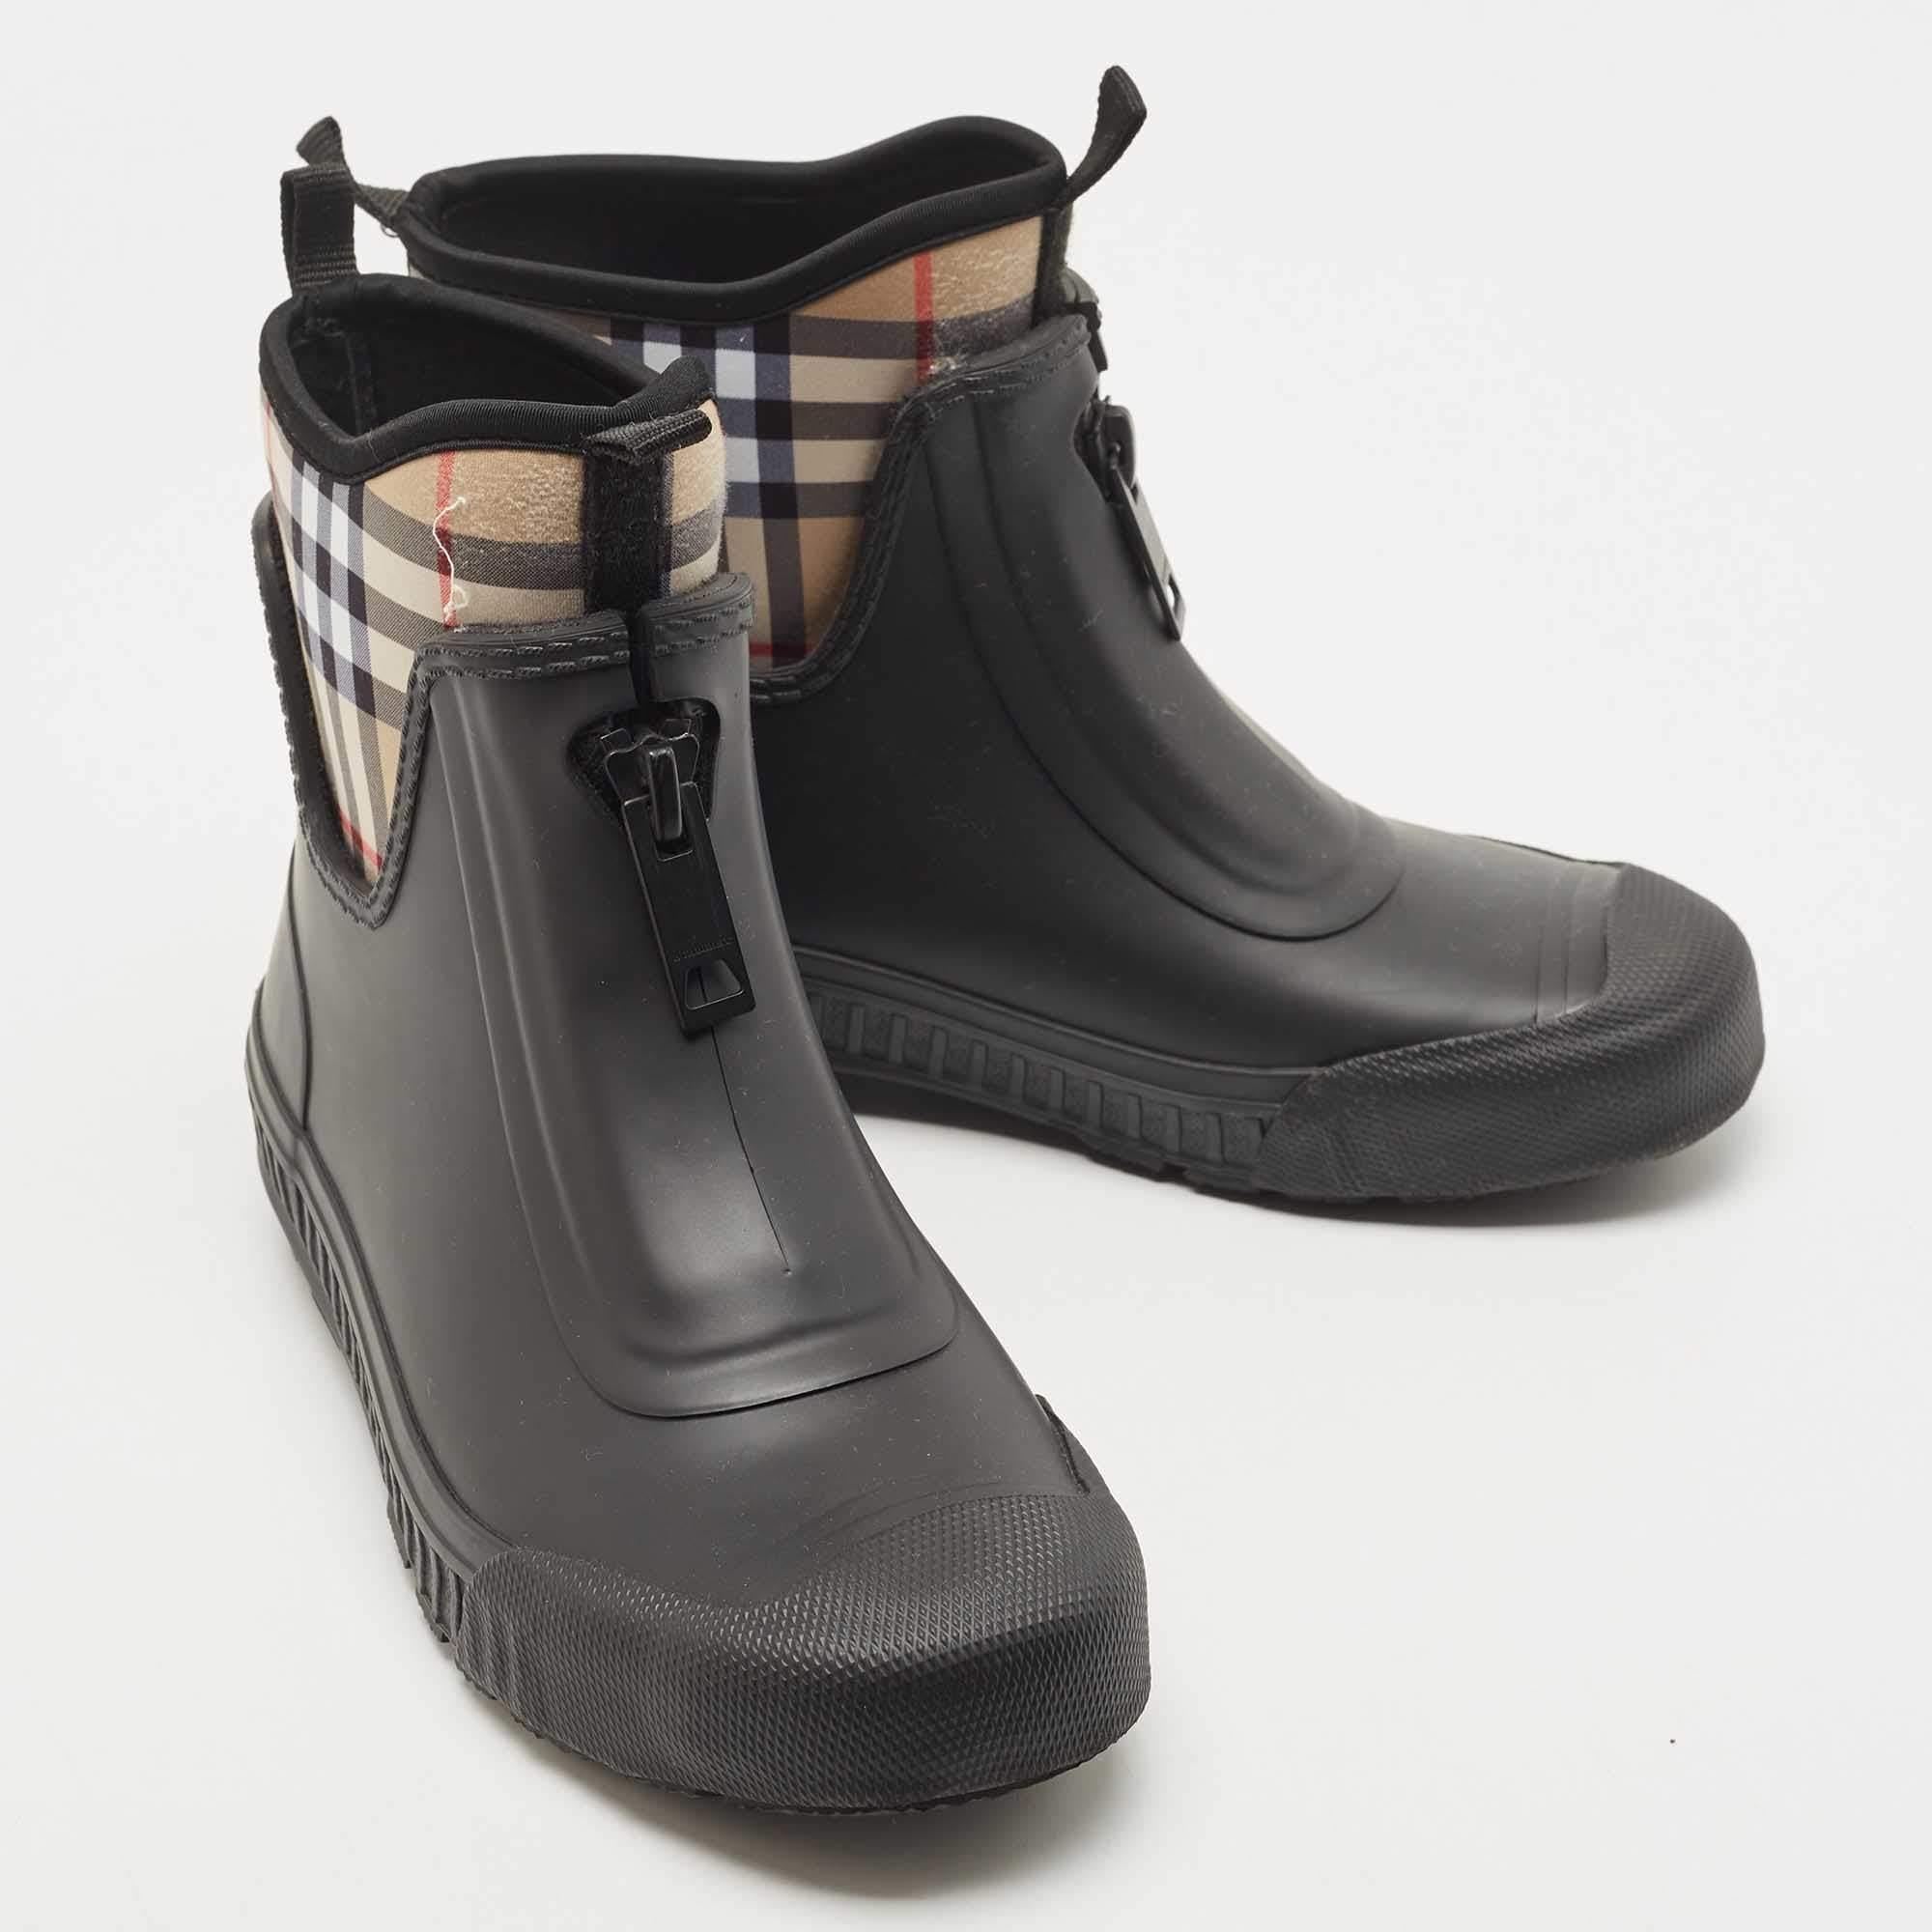 Burberry Black Rubber and Vintage Check Neoprene Rain Boots Size 37 1